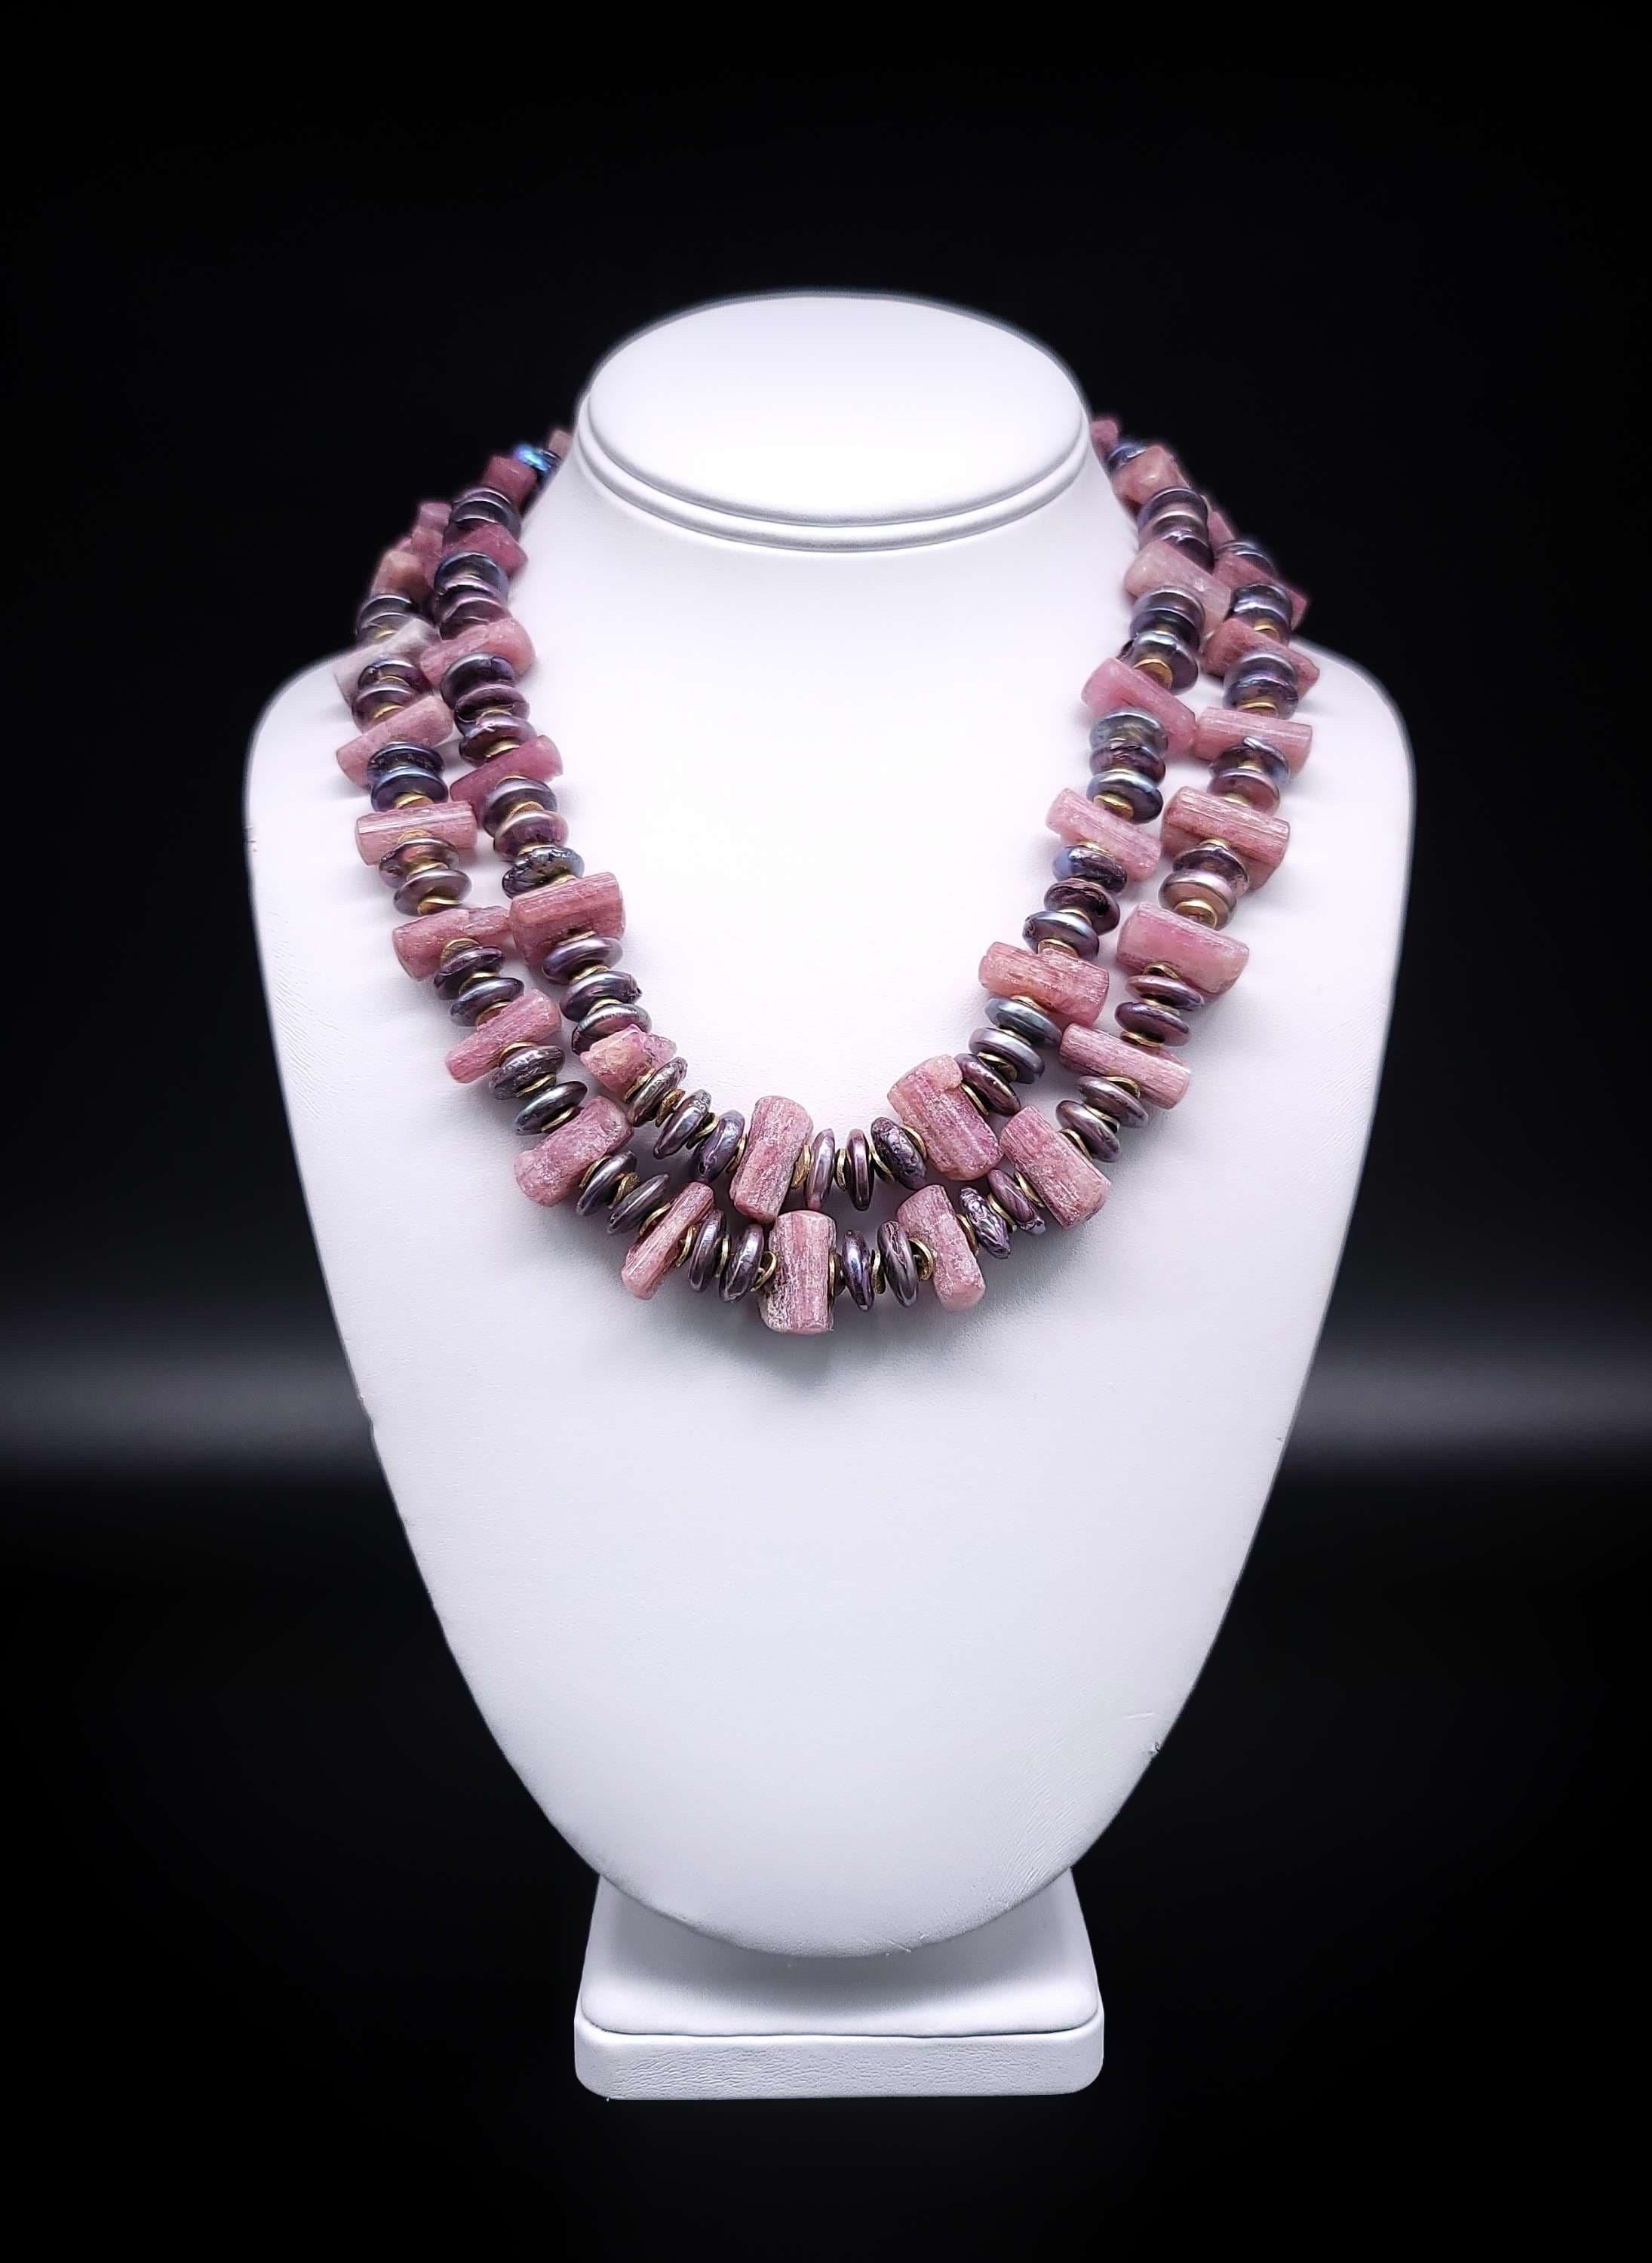 Crafted with meticulous attention to detail and a passion for fine craftsmanship, our One-of-a-Kind Tourmaline and Pearl Necklace is a true labor of love.

Each exquisite piece begins with carefully selected rough-cut and polished Tourmaline rods,